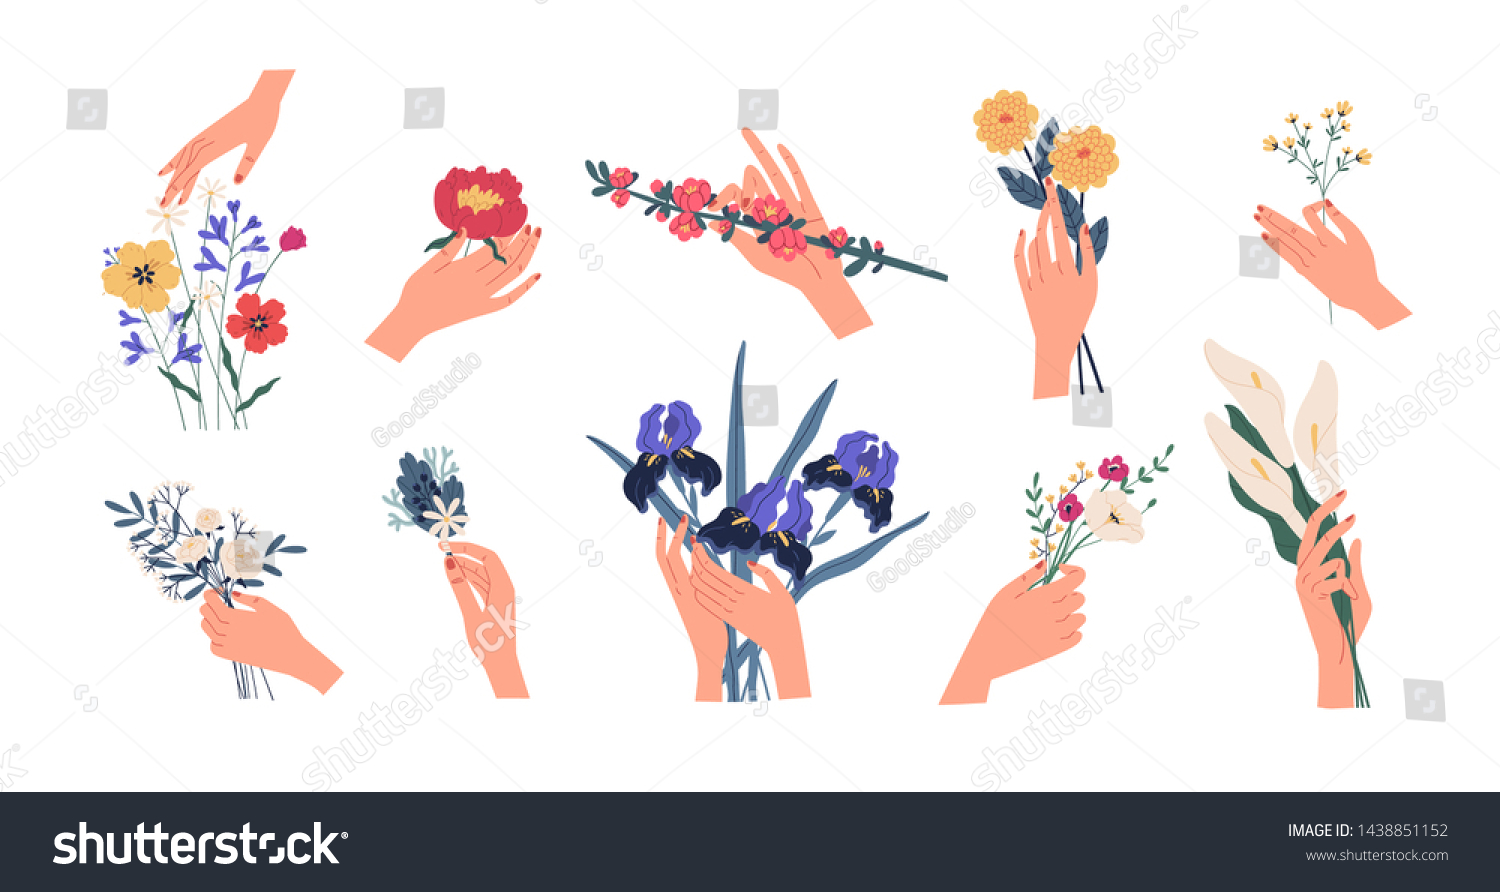 stock-vector-collection-of-hands-holding-bouquets-or-bunches-of-blooming-flowers-bundle-of-floral-decorative-1438851152